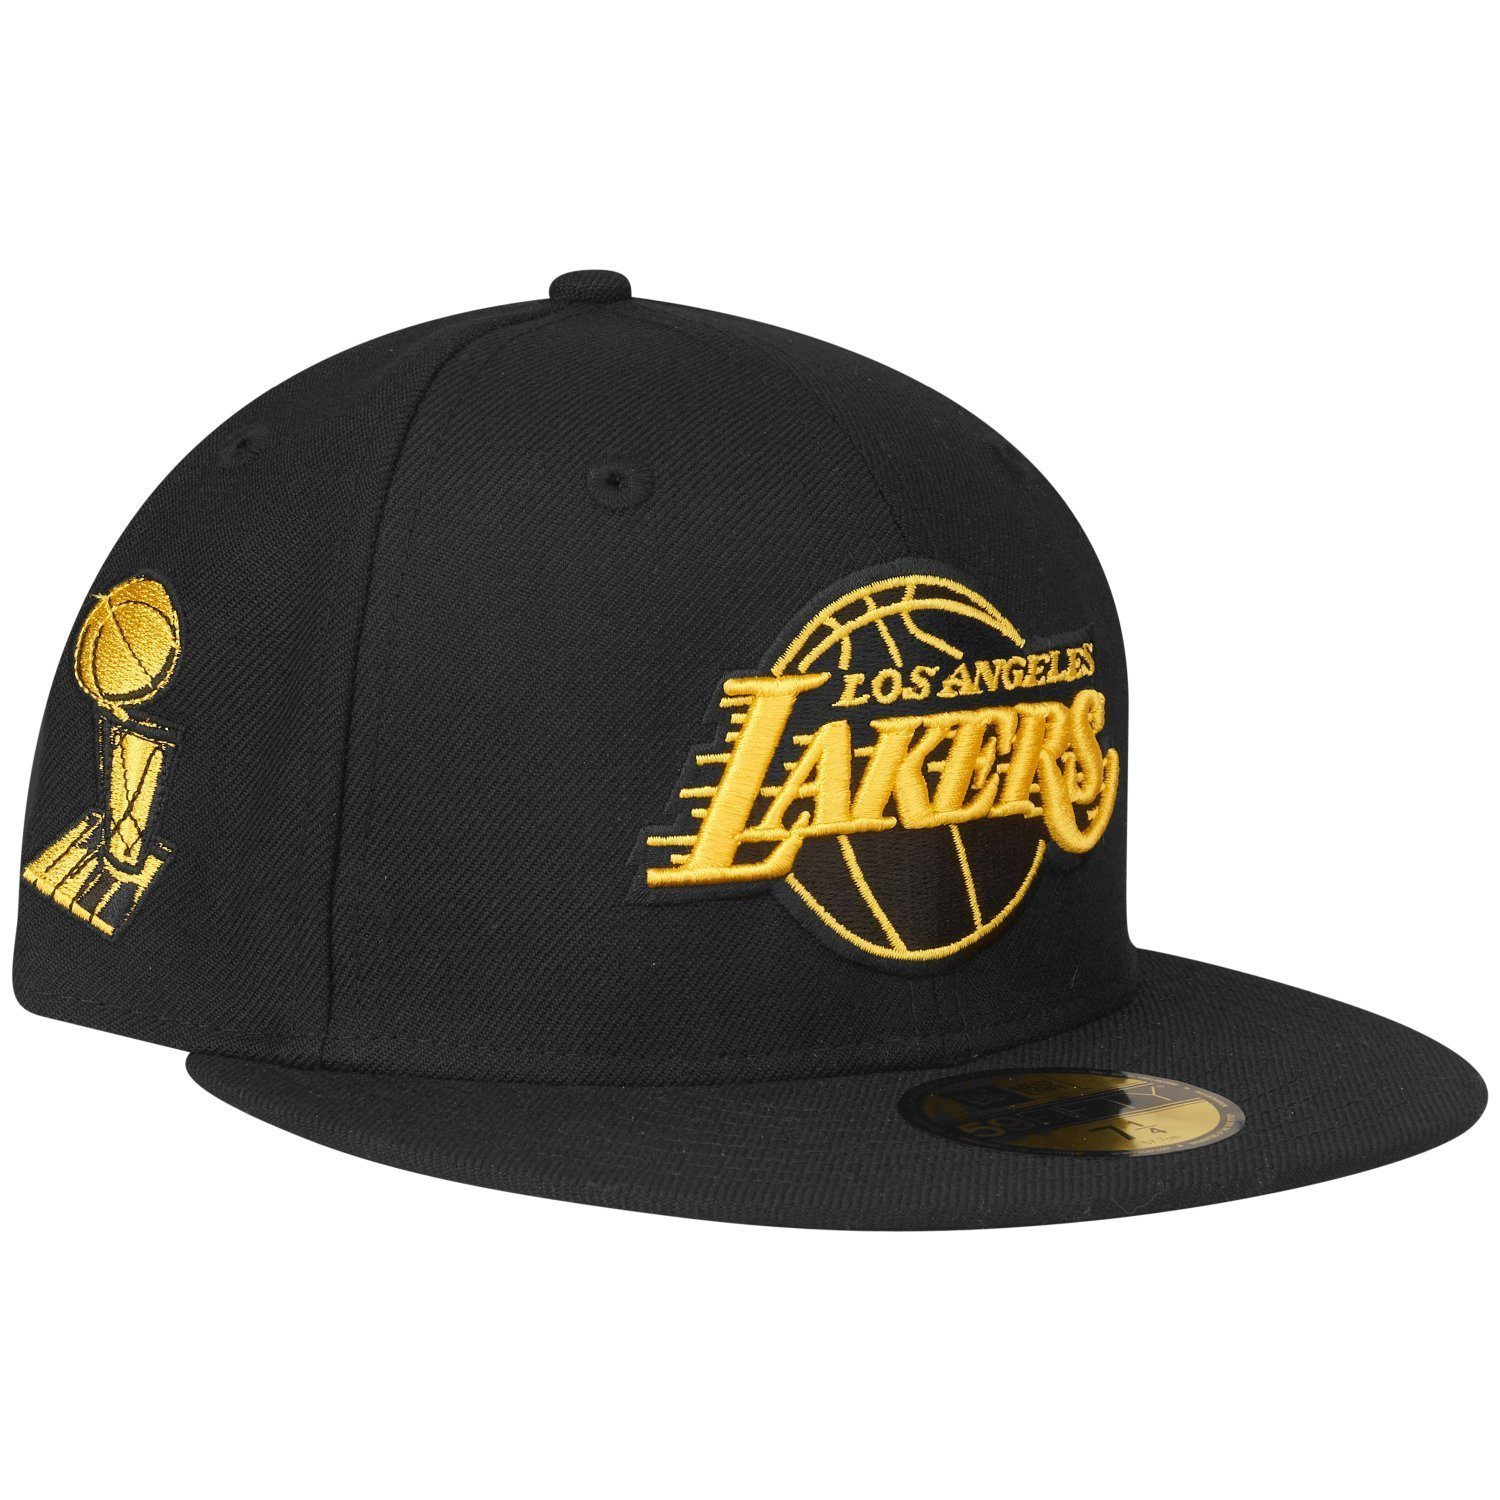 Cap Angeles Fitted NBA Los Lakers CHAMPS New Era 59Fifty